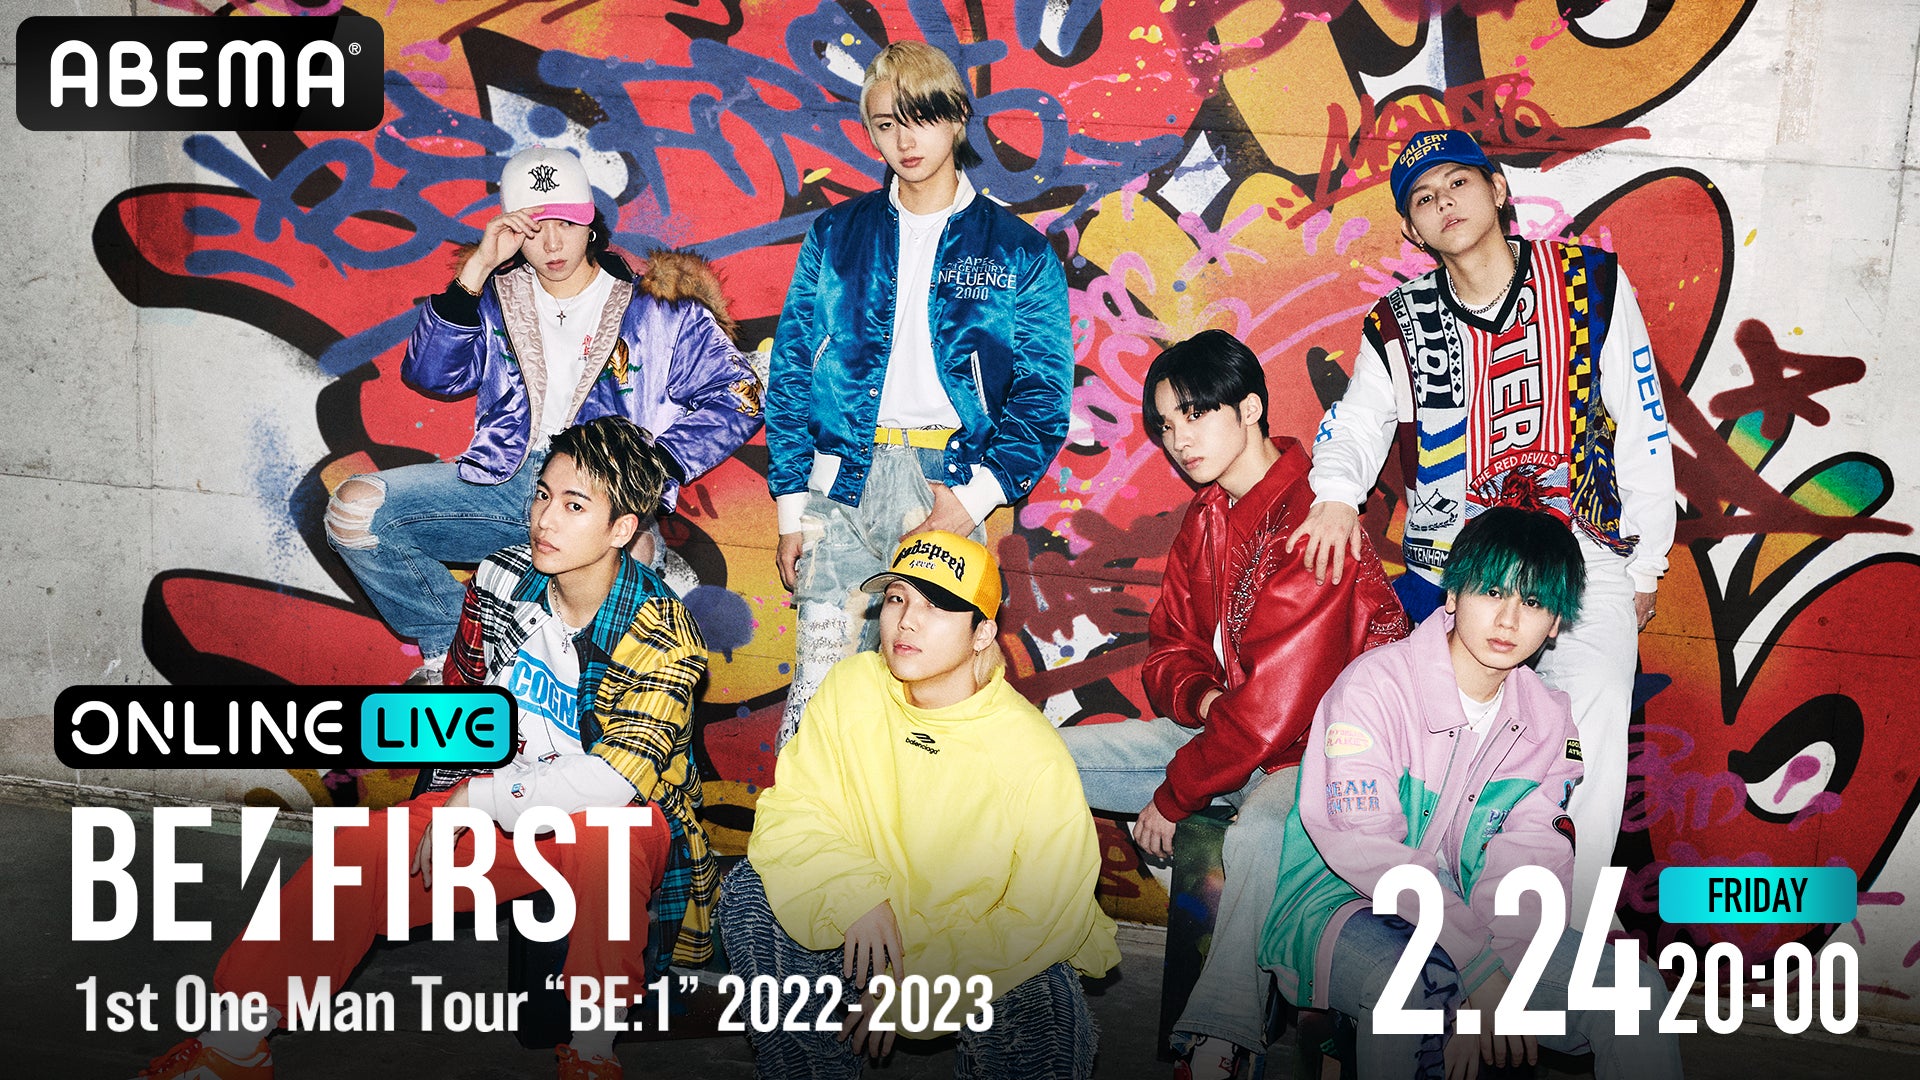 BE:FIRST初の全国ワンマンツアー『BE:FIRST 1st One Man Tour 